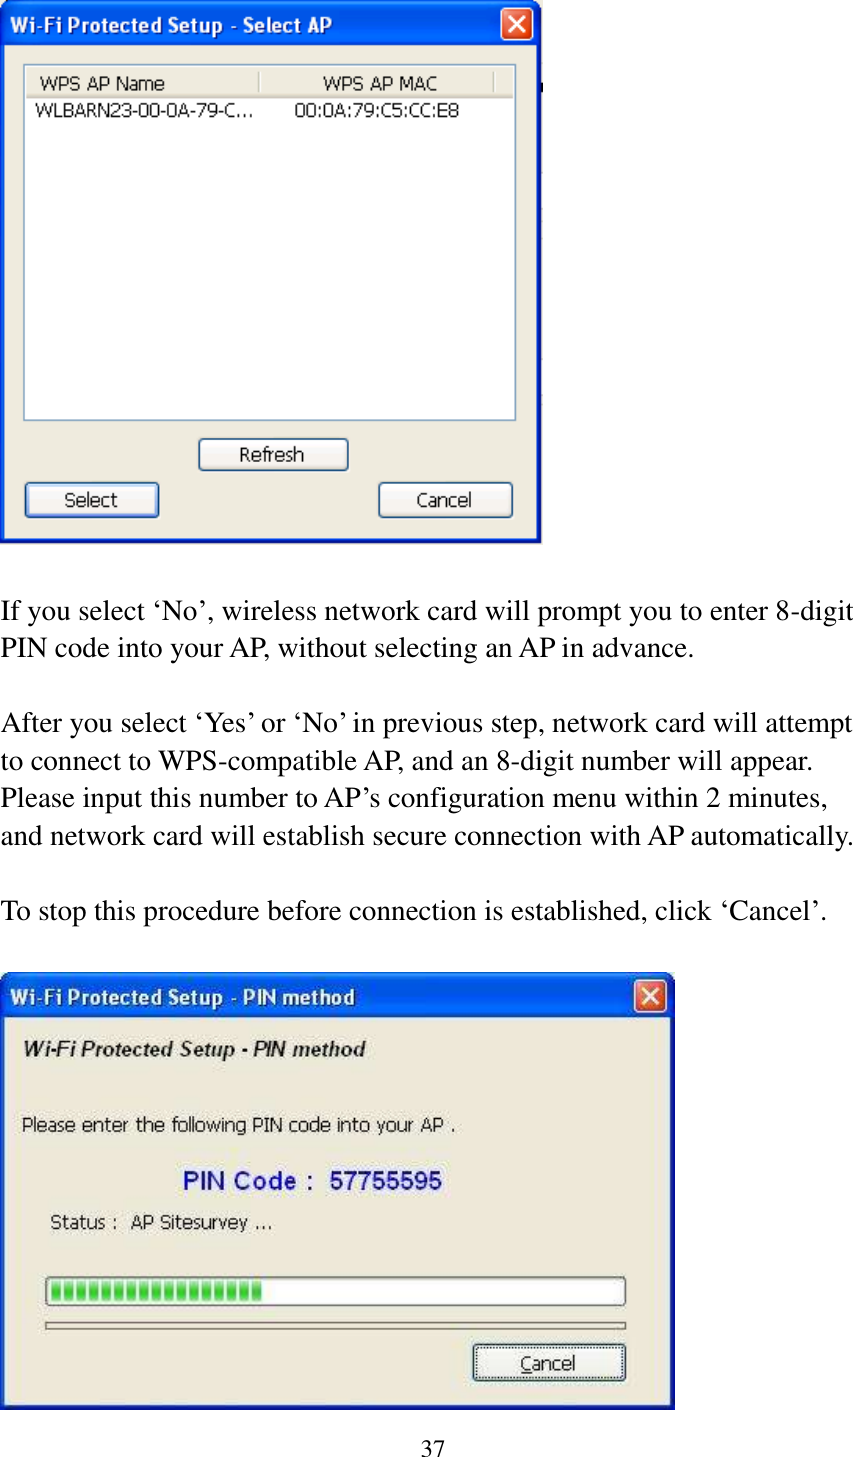 37    If you select ‘No’, wireless network card will prompt you to enter 8-digit PIN code into your AP, without selecting an AP in advance.  After you select ‘Yes’ or ‘No’ in previous step, network card will attempt to connect to WPS-compatible AP, and an 8-digit number will appear. Please input this number to AP’s configuration menu within 2 minutes, and network card will establish secure connection with AP automatically.  To stop this procedure before connection is established, click ‘Cancel’.   